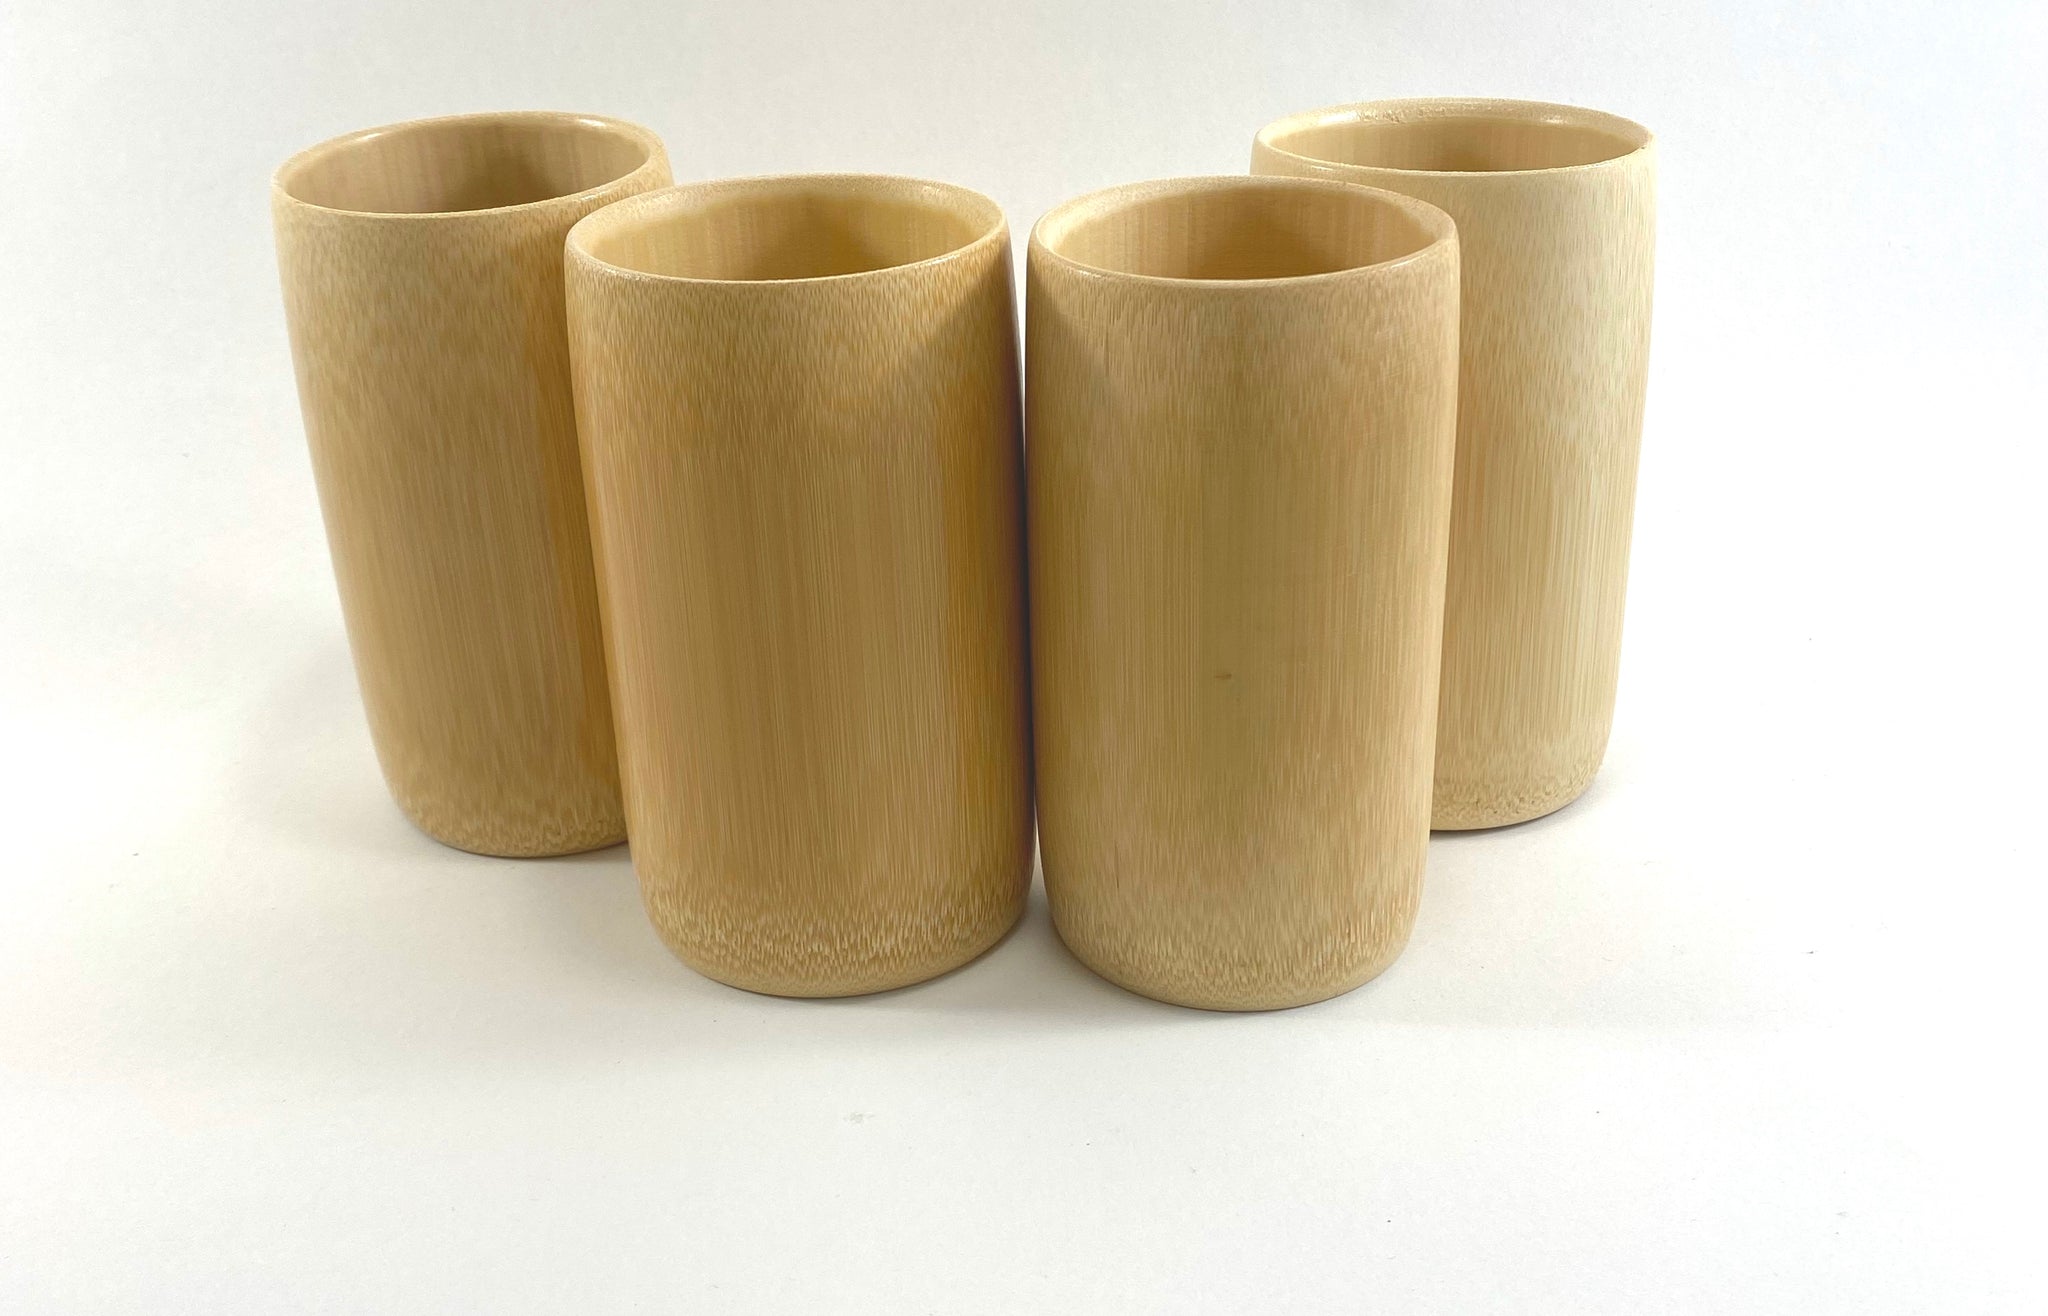 Bamboo Handicraft, Bamboo Cup, Non-pollution Safety and Healthy, Natural  Green and Eco-friendly –